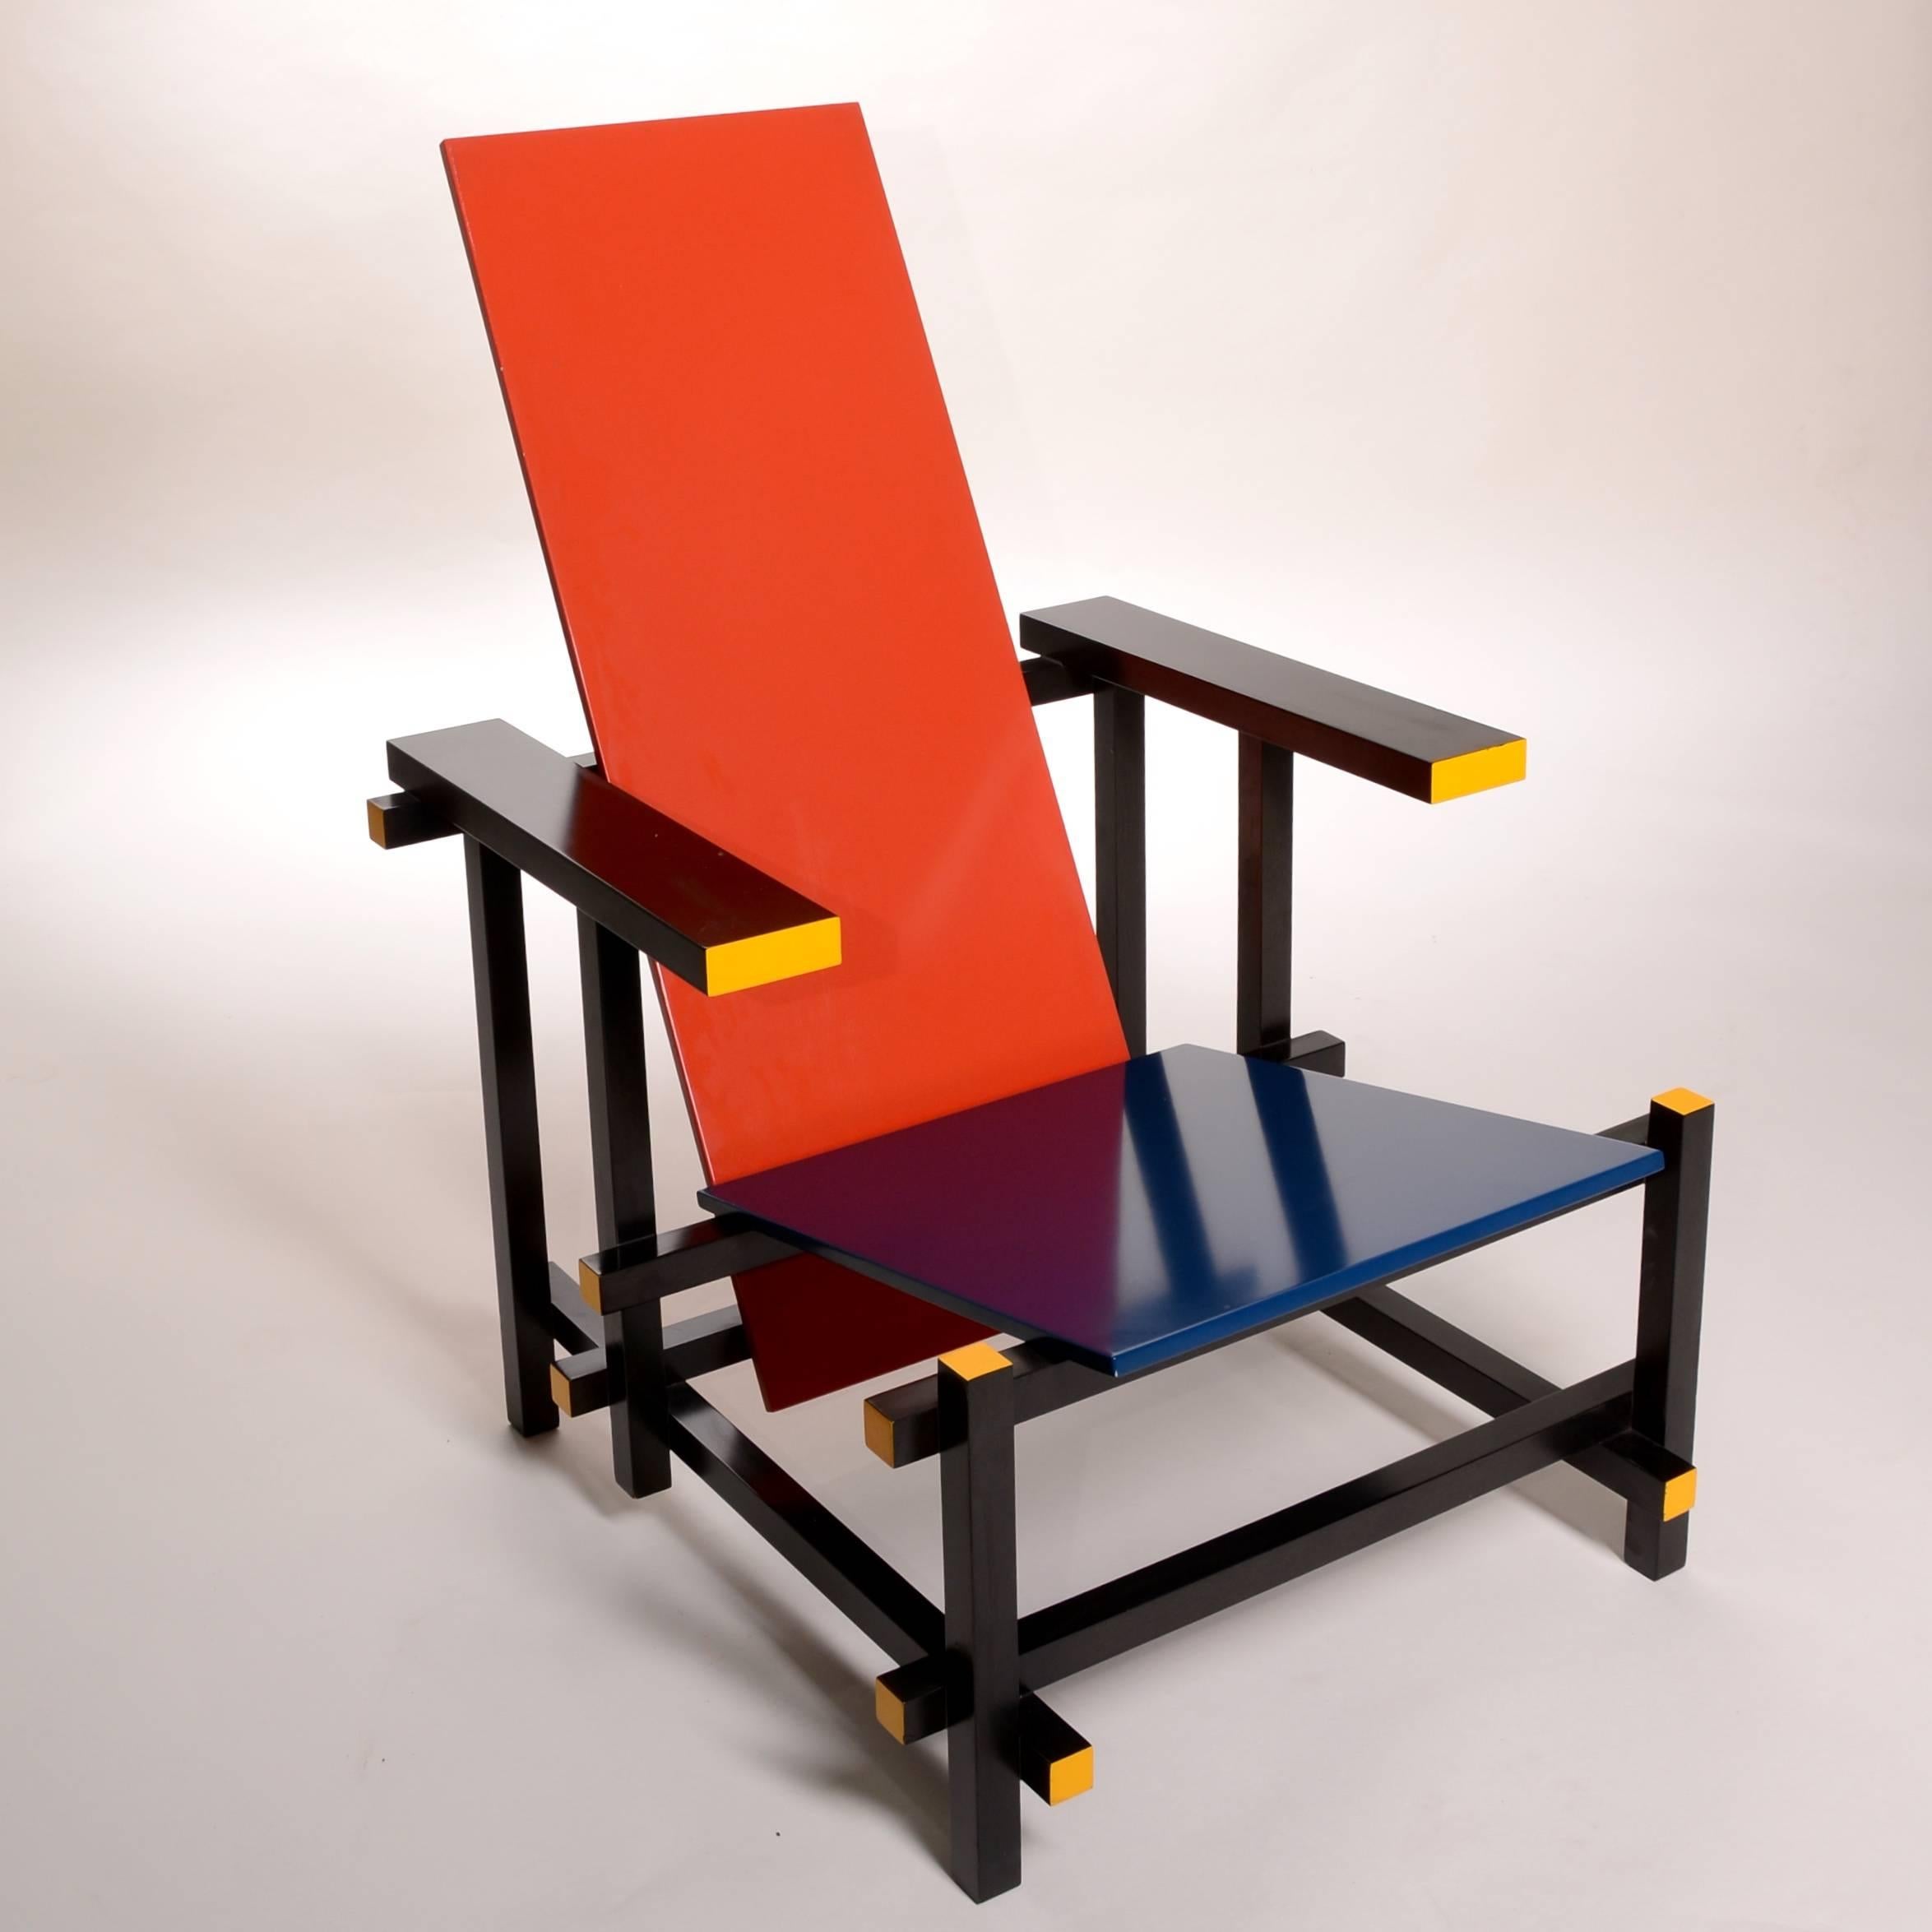 Dutch Red and Blue Chair by Thomas Rietveld for Cassina